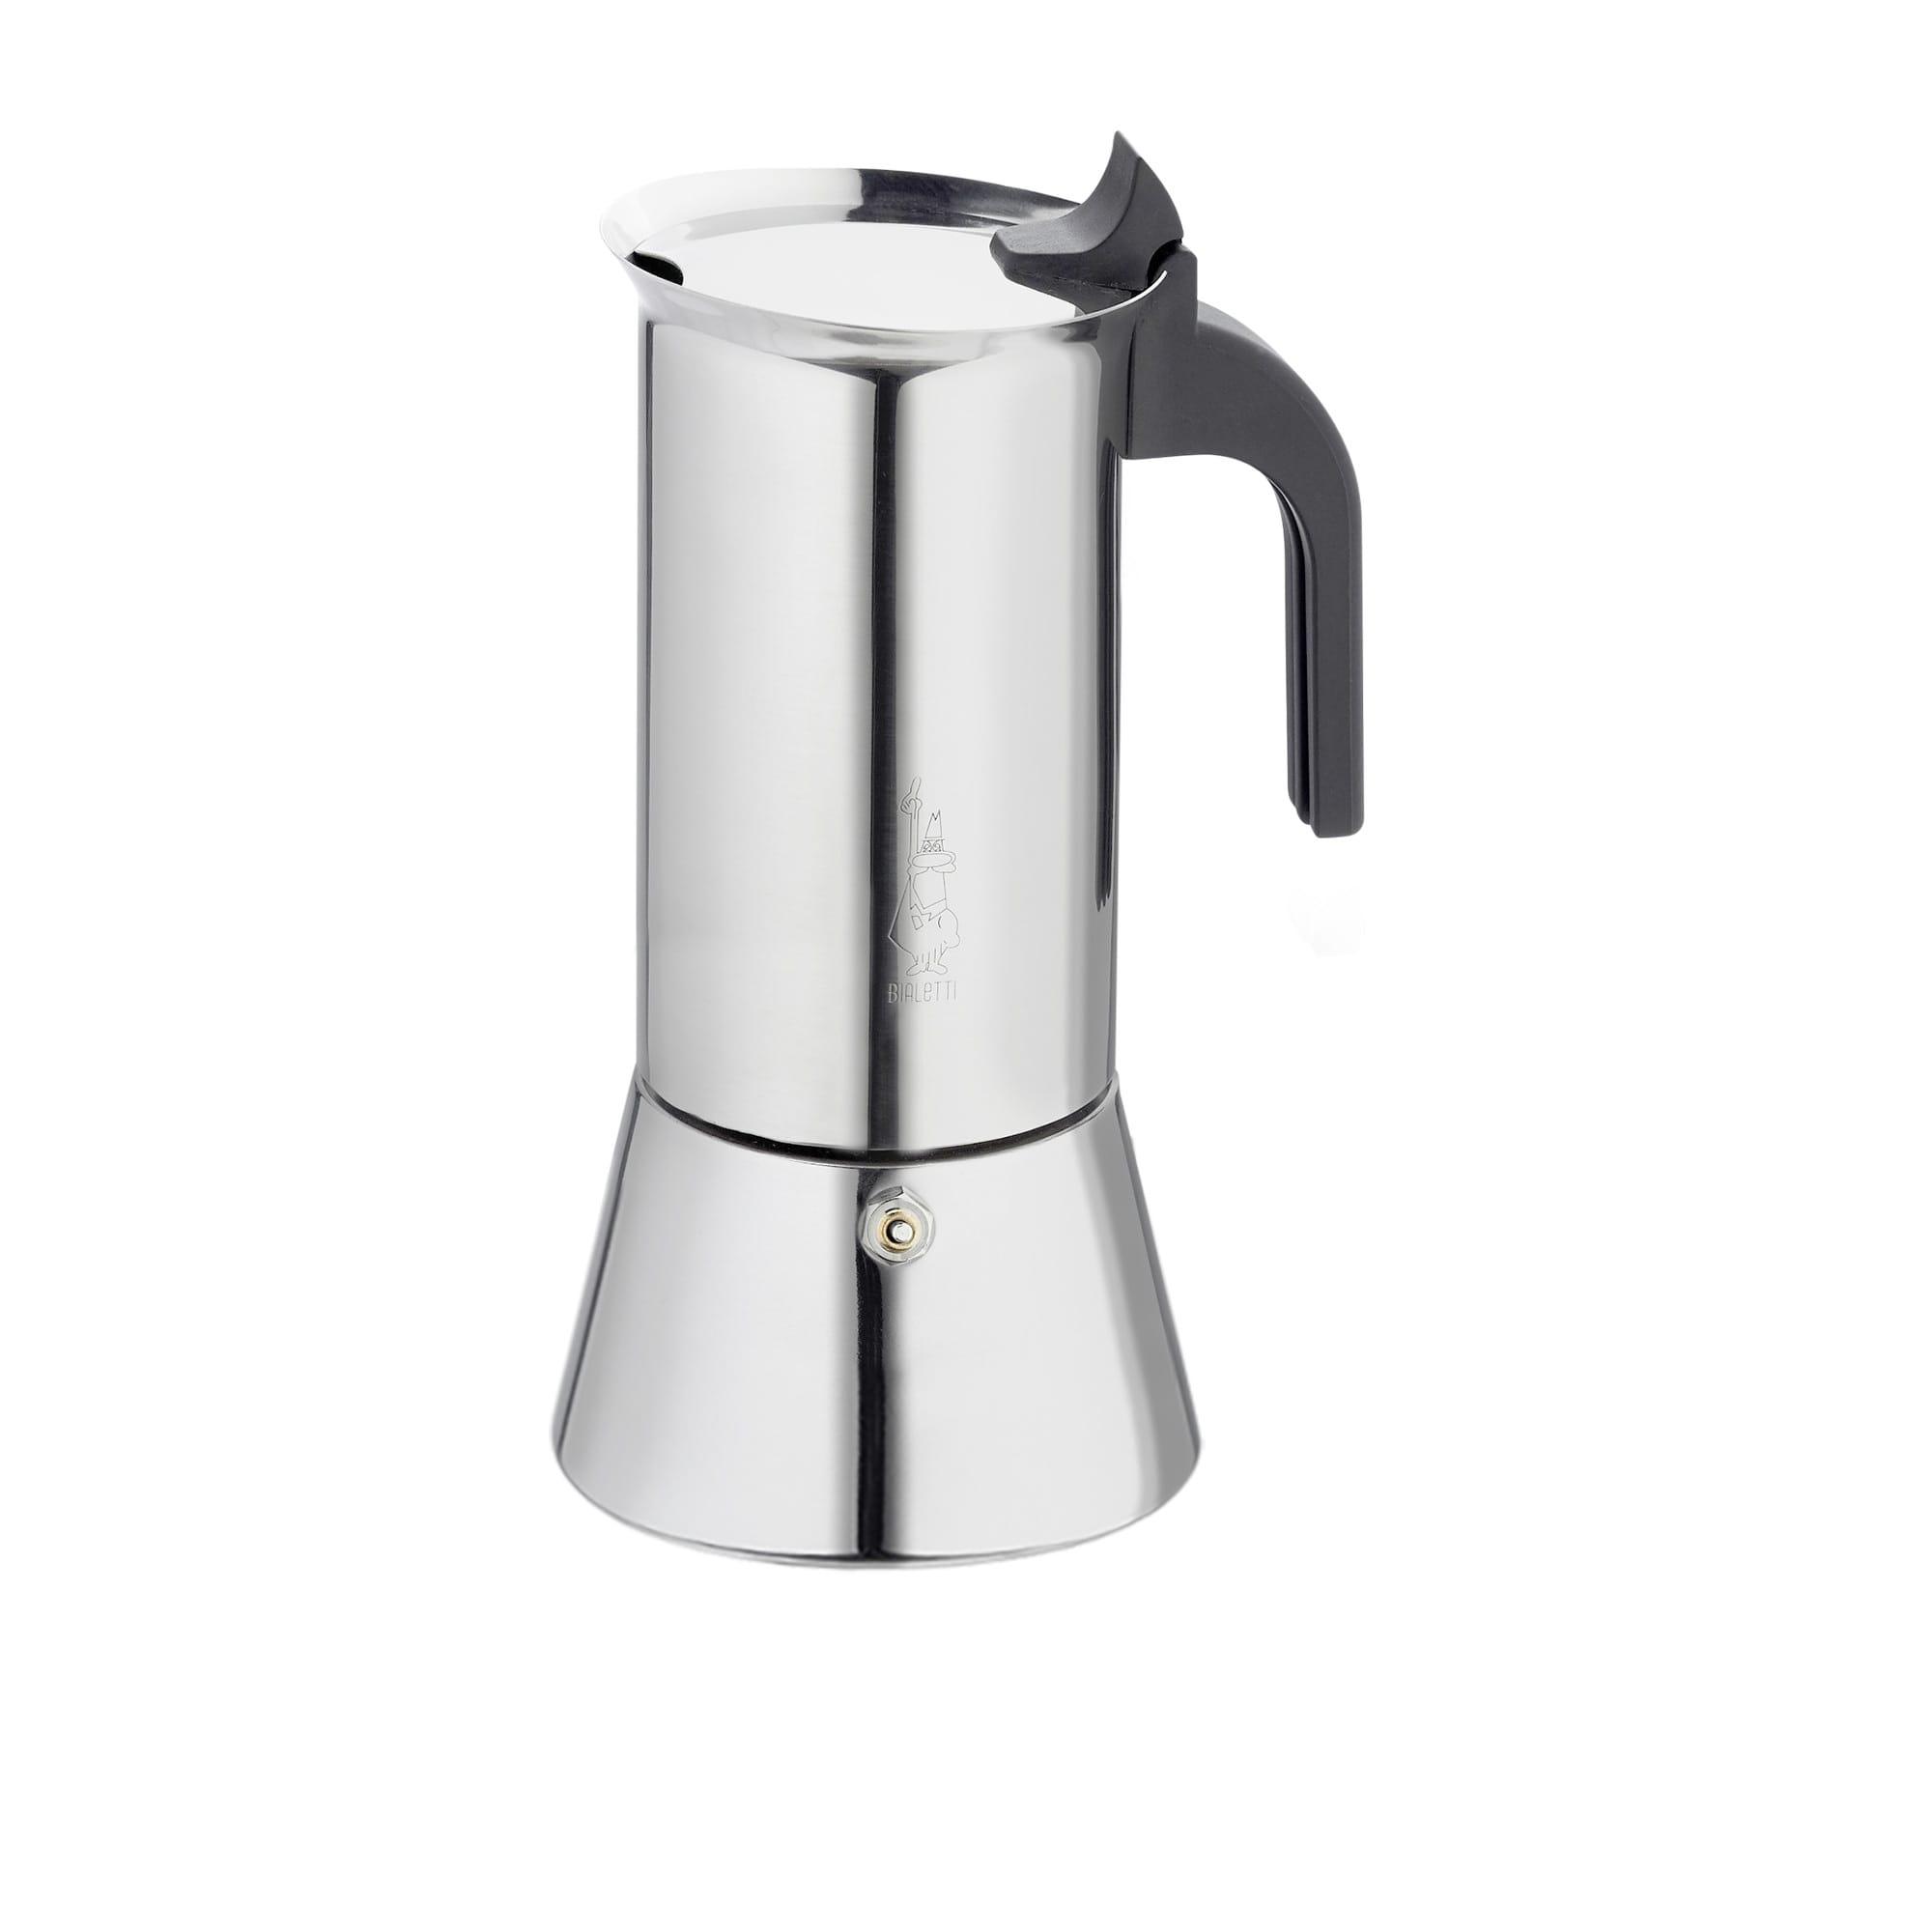 Bialetti Venus Stainless Steel Induction Espresso Maker 10 Cup Image 3